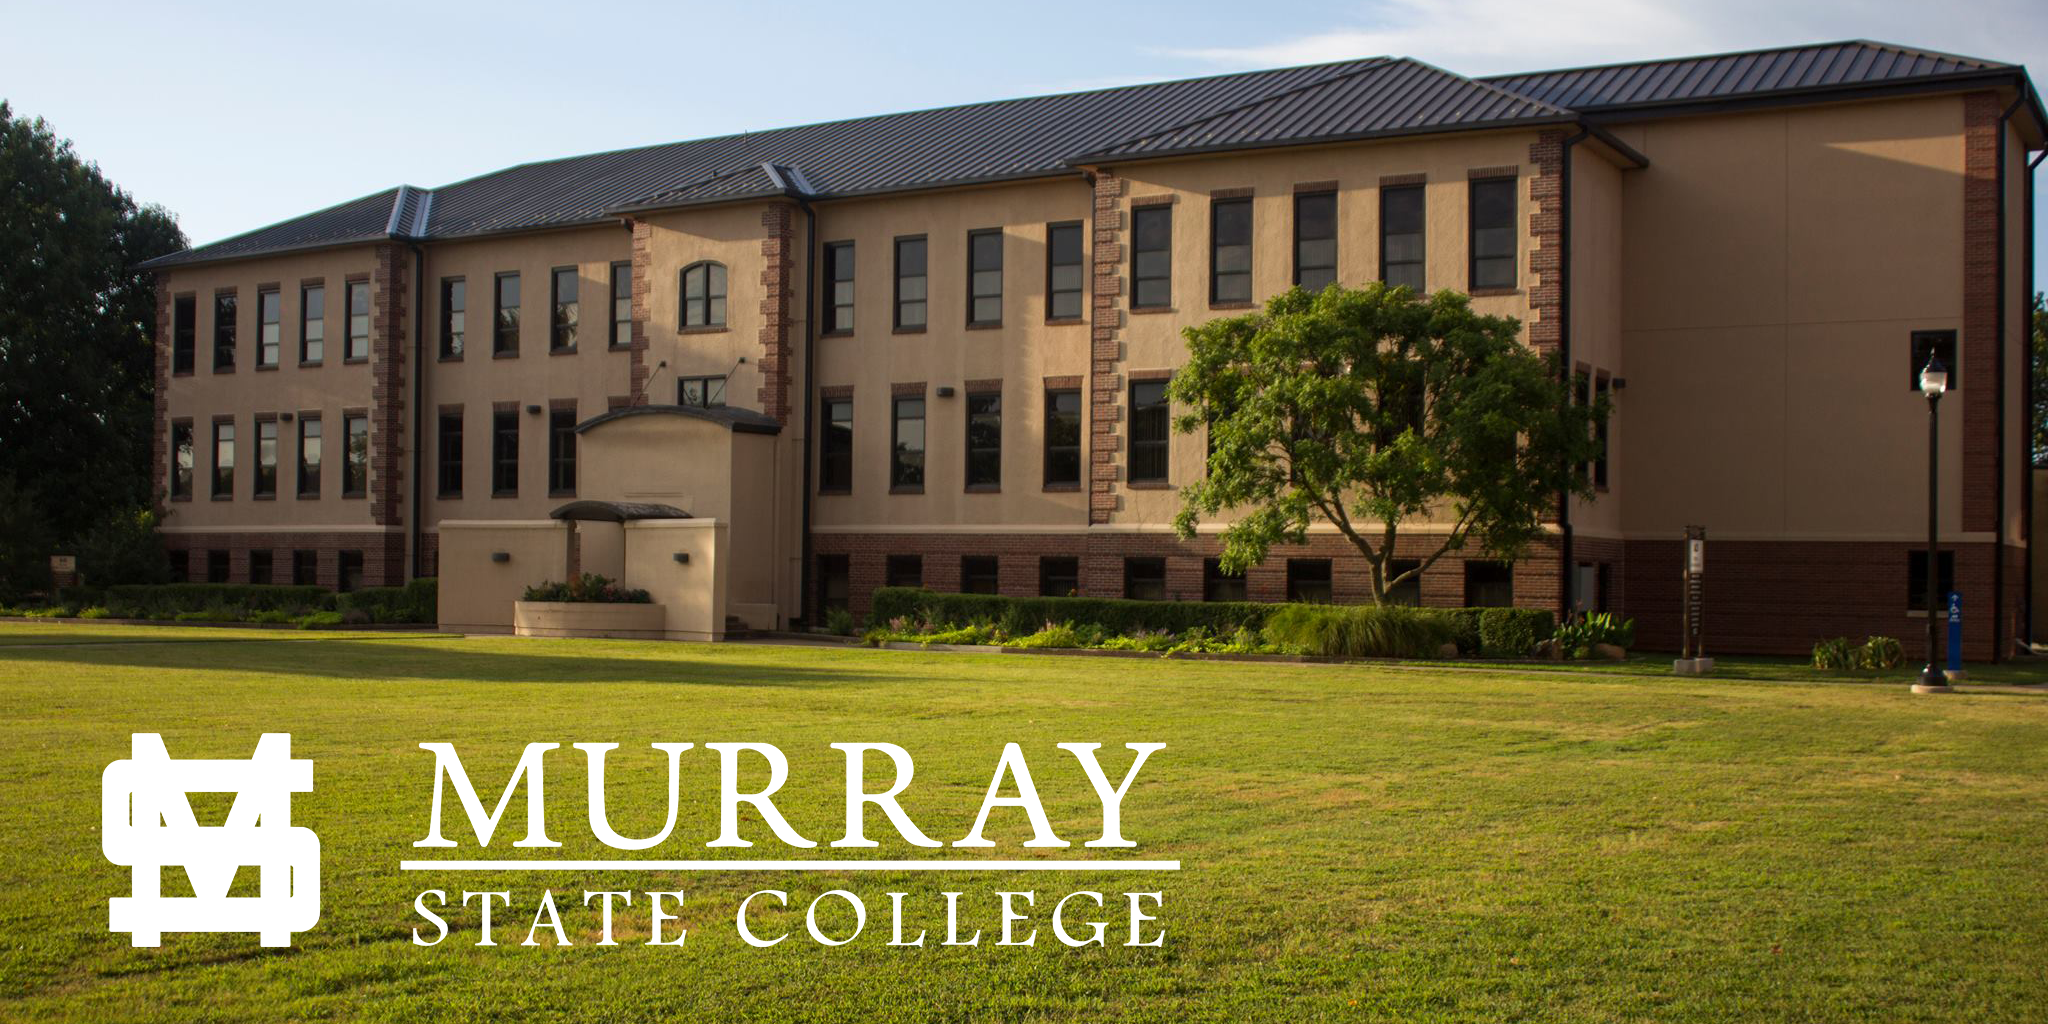 Murray State College